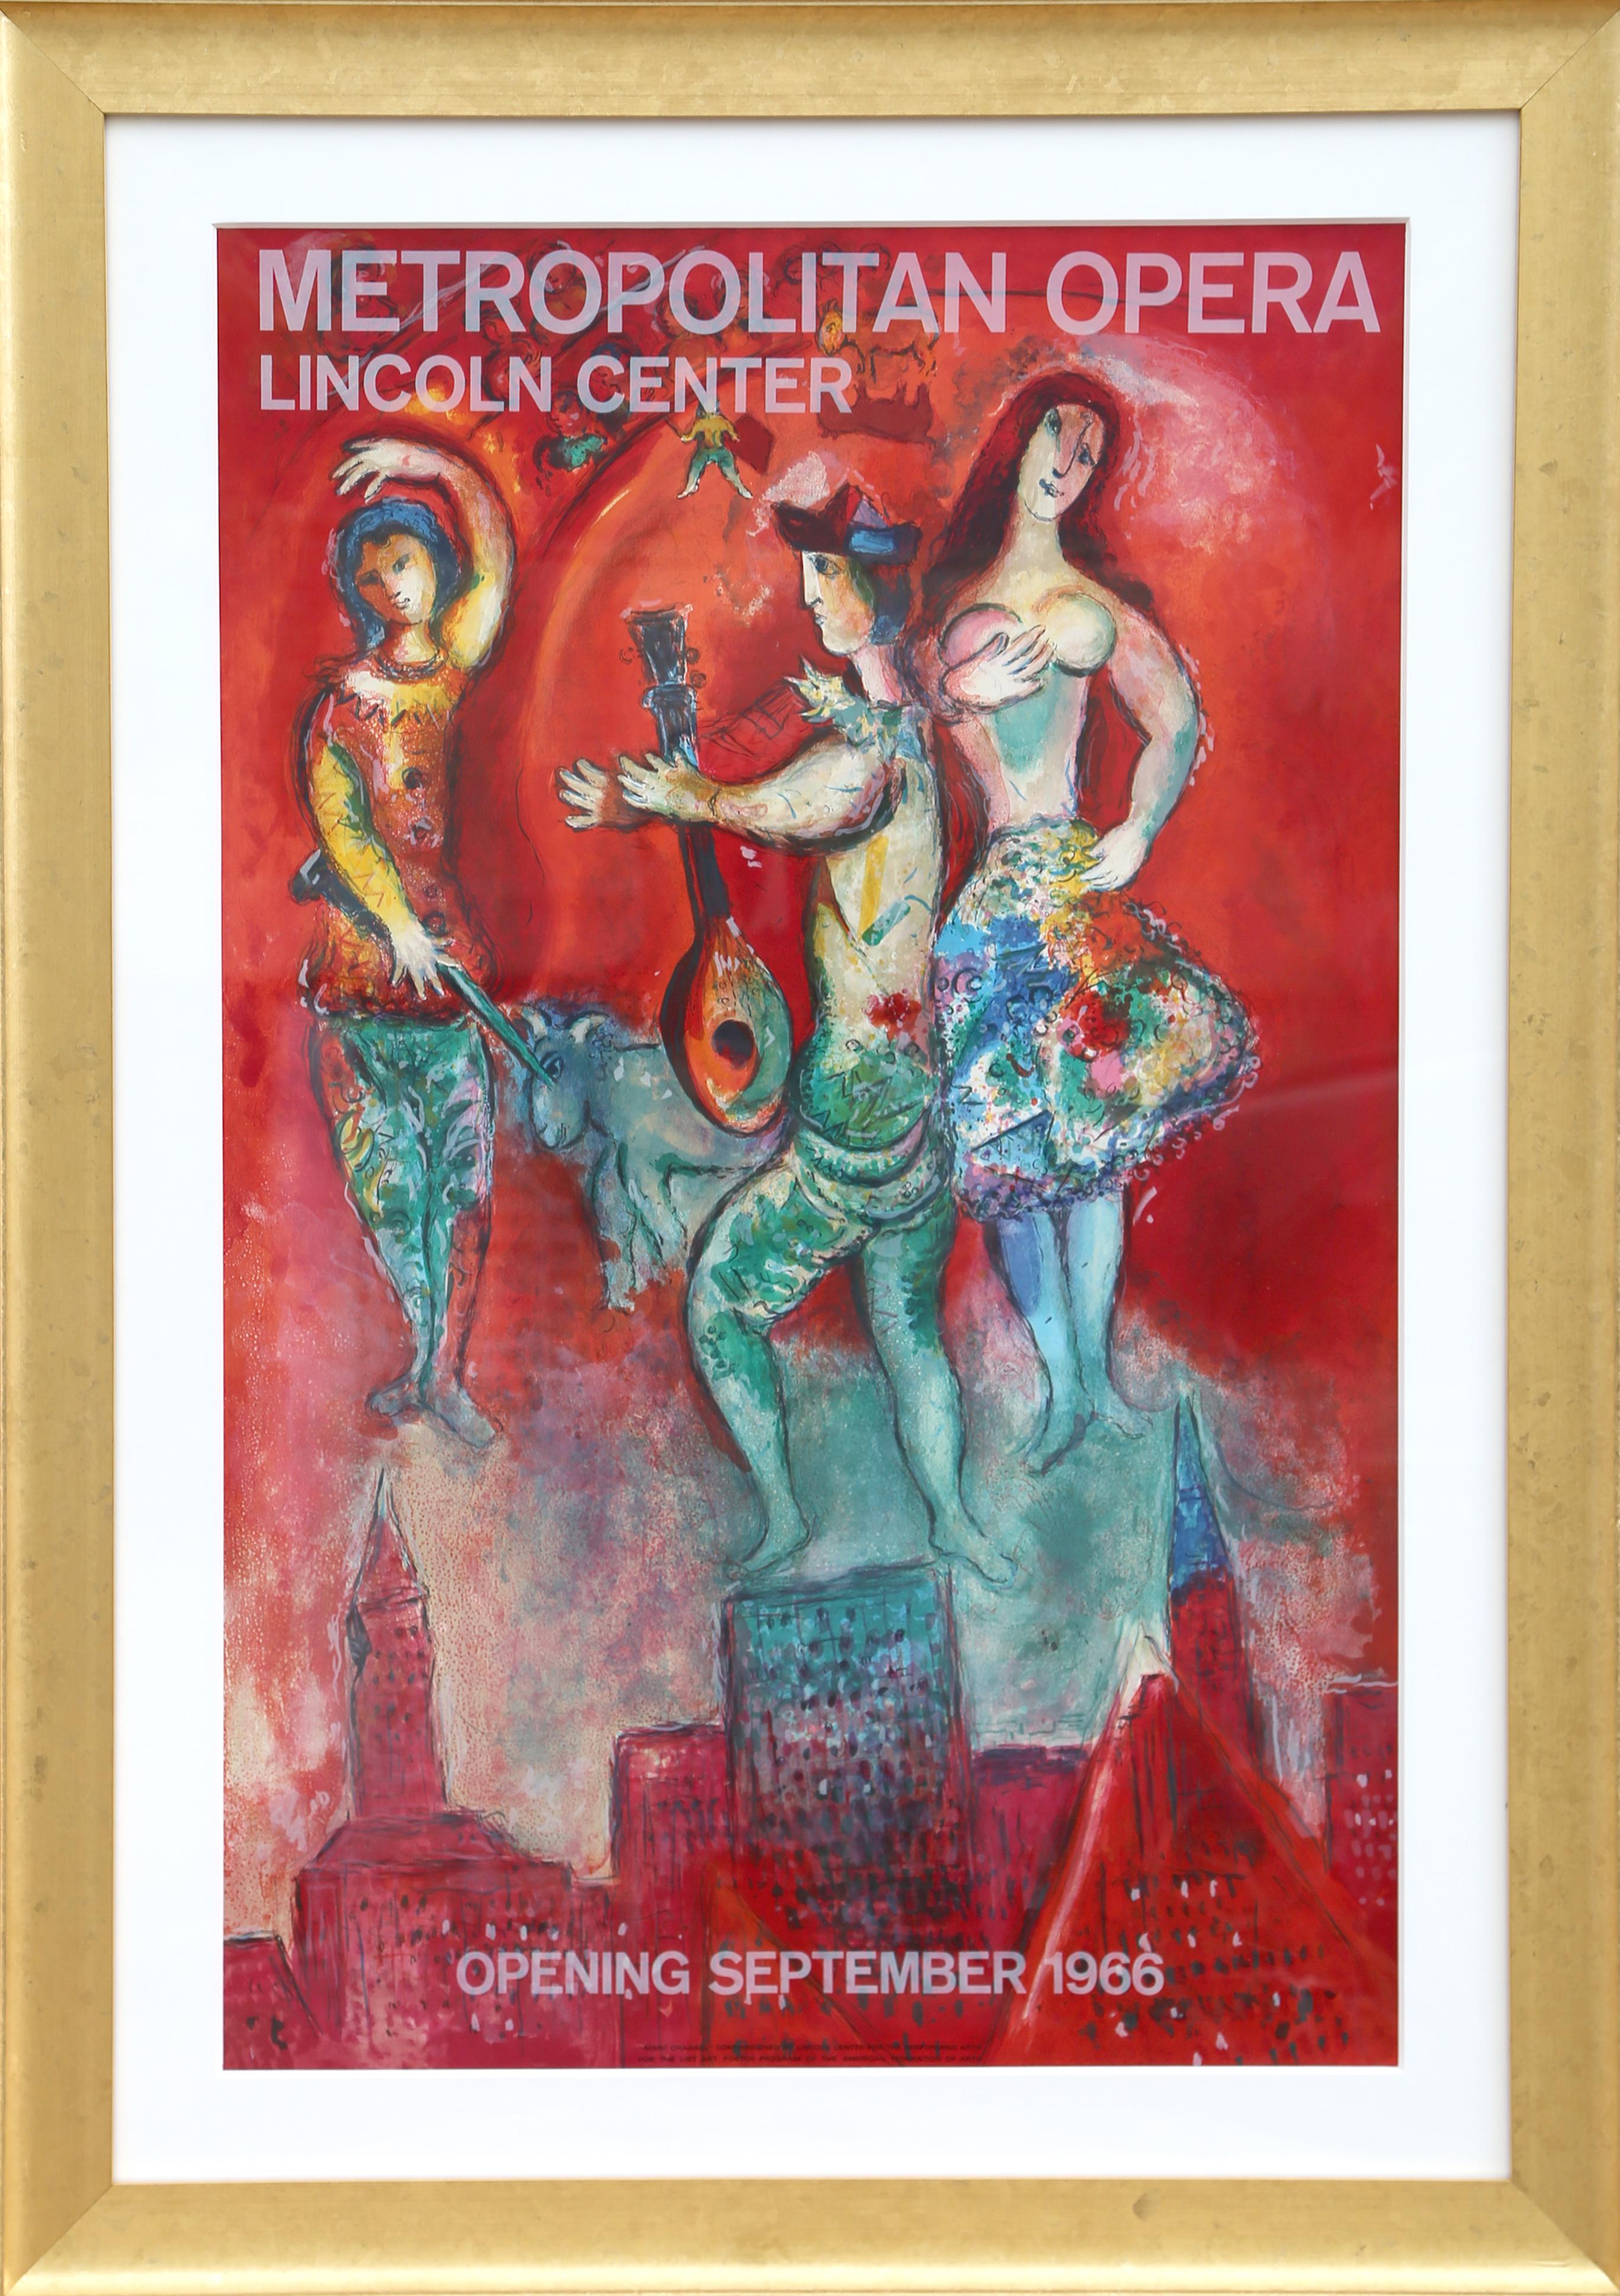 (after) Marc Chagall Figurative Print - "Carmen", Metropolitan Opera Lincoln Center Lithograph by Marc Chagall 1966